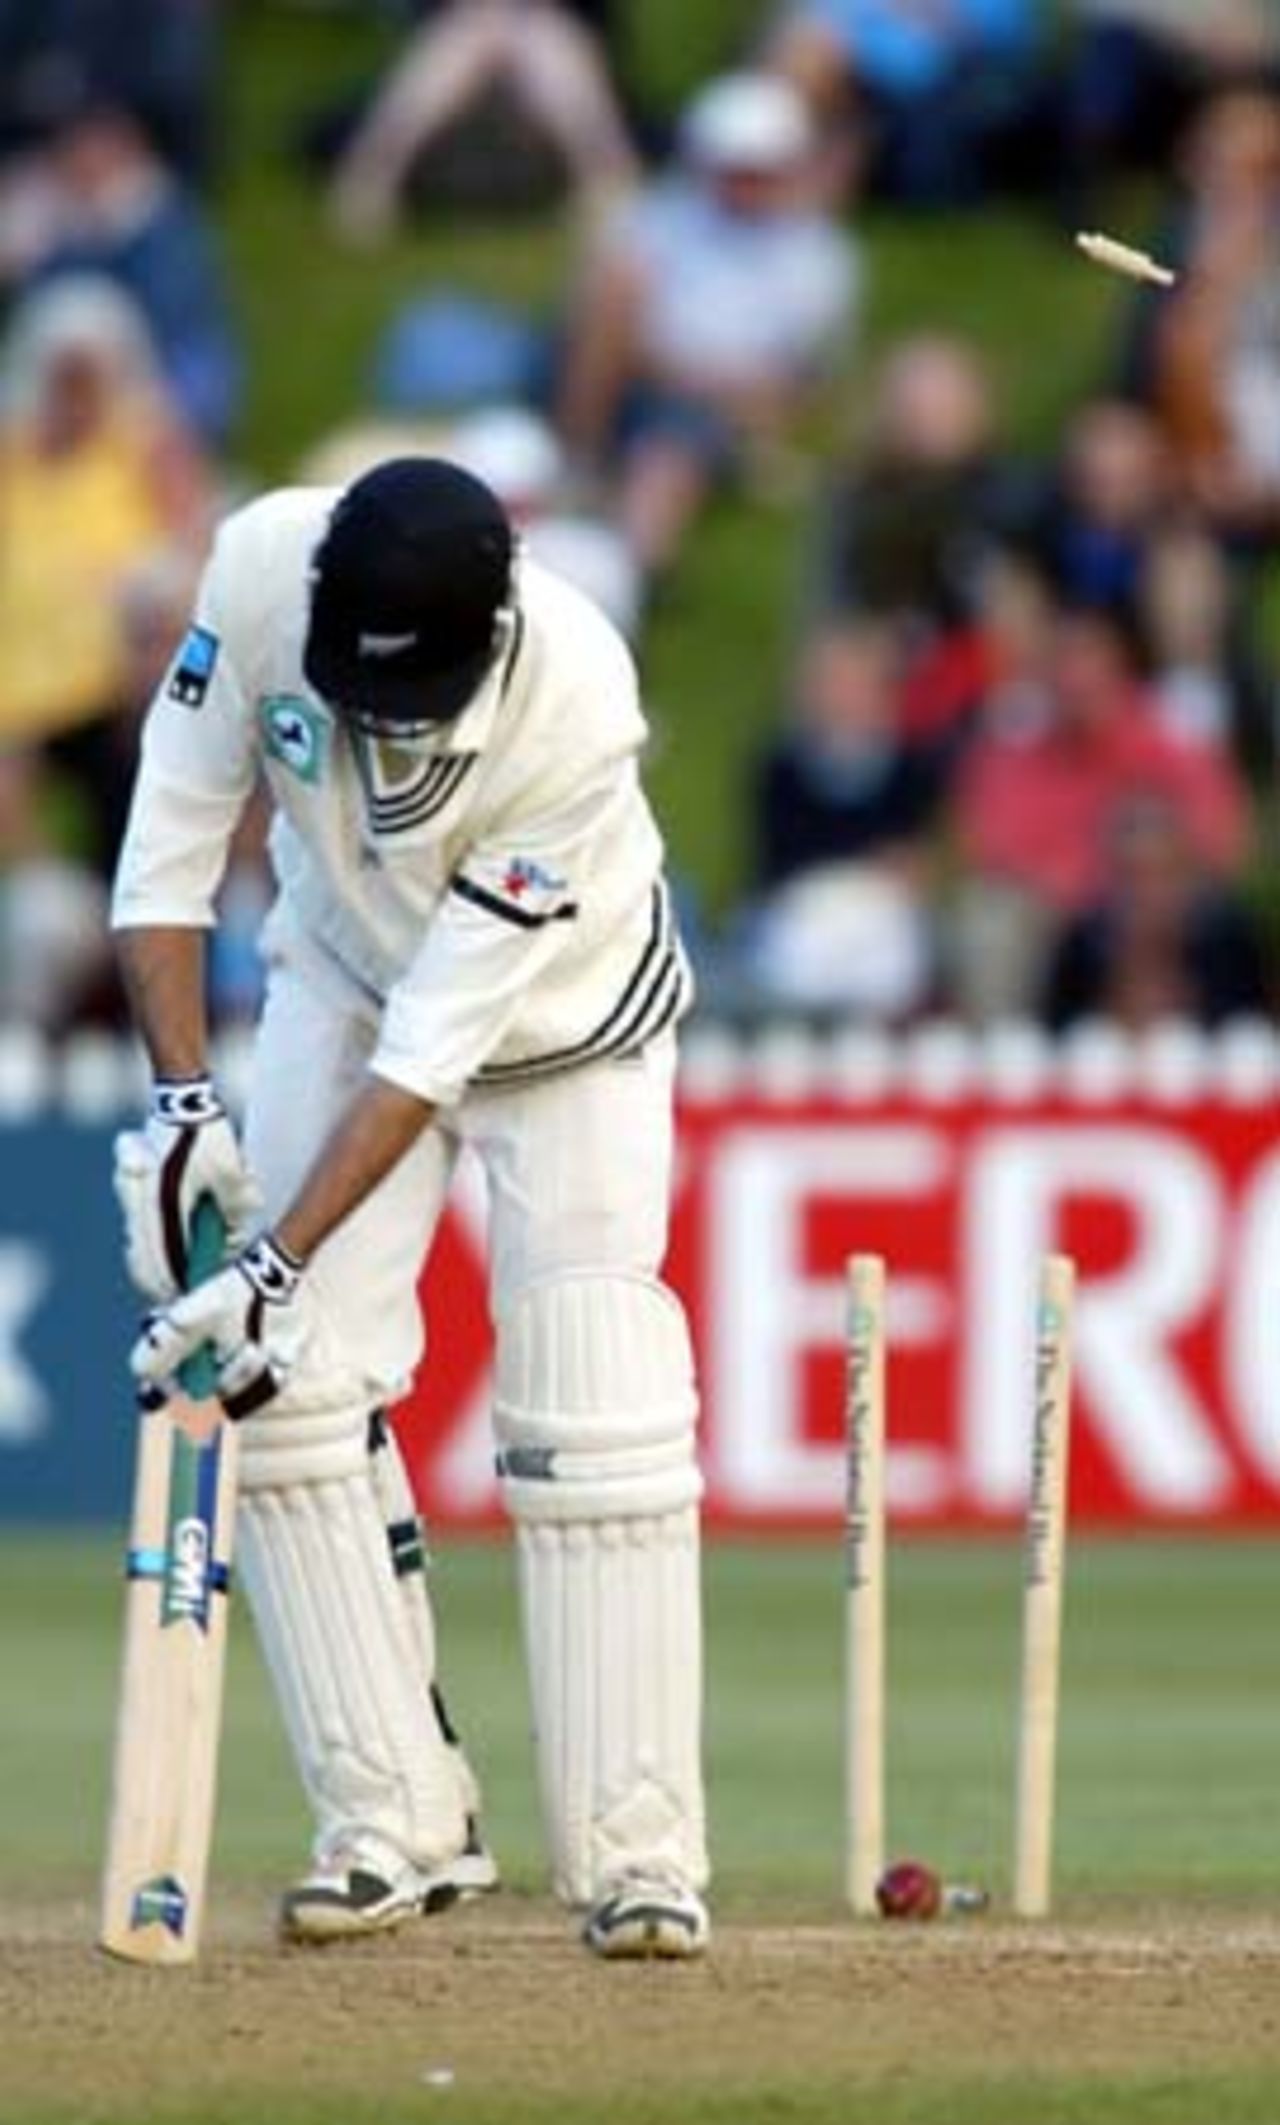 New Zealand batsman Stephen Fleming is bowled by England bowler Matthew Hoggard for 11 in his second innings. 2nd Test: New Zealand v England at Basin Reserve, Wellington, 21-25 March 2002 (25 March 2002).